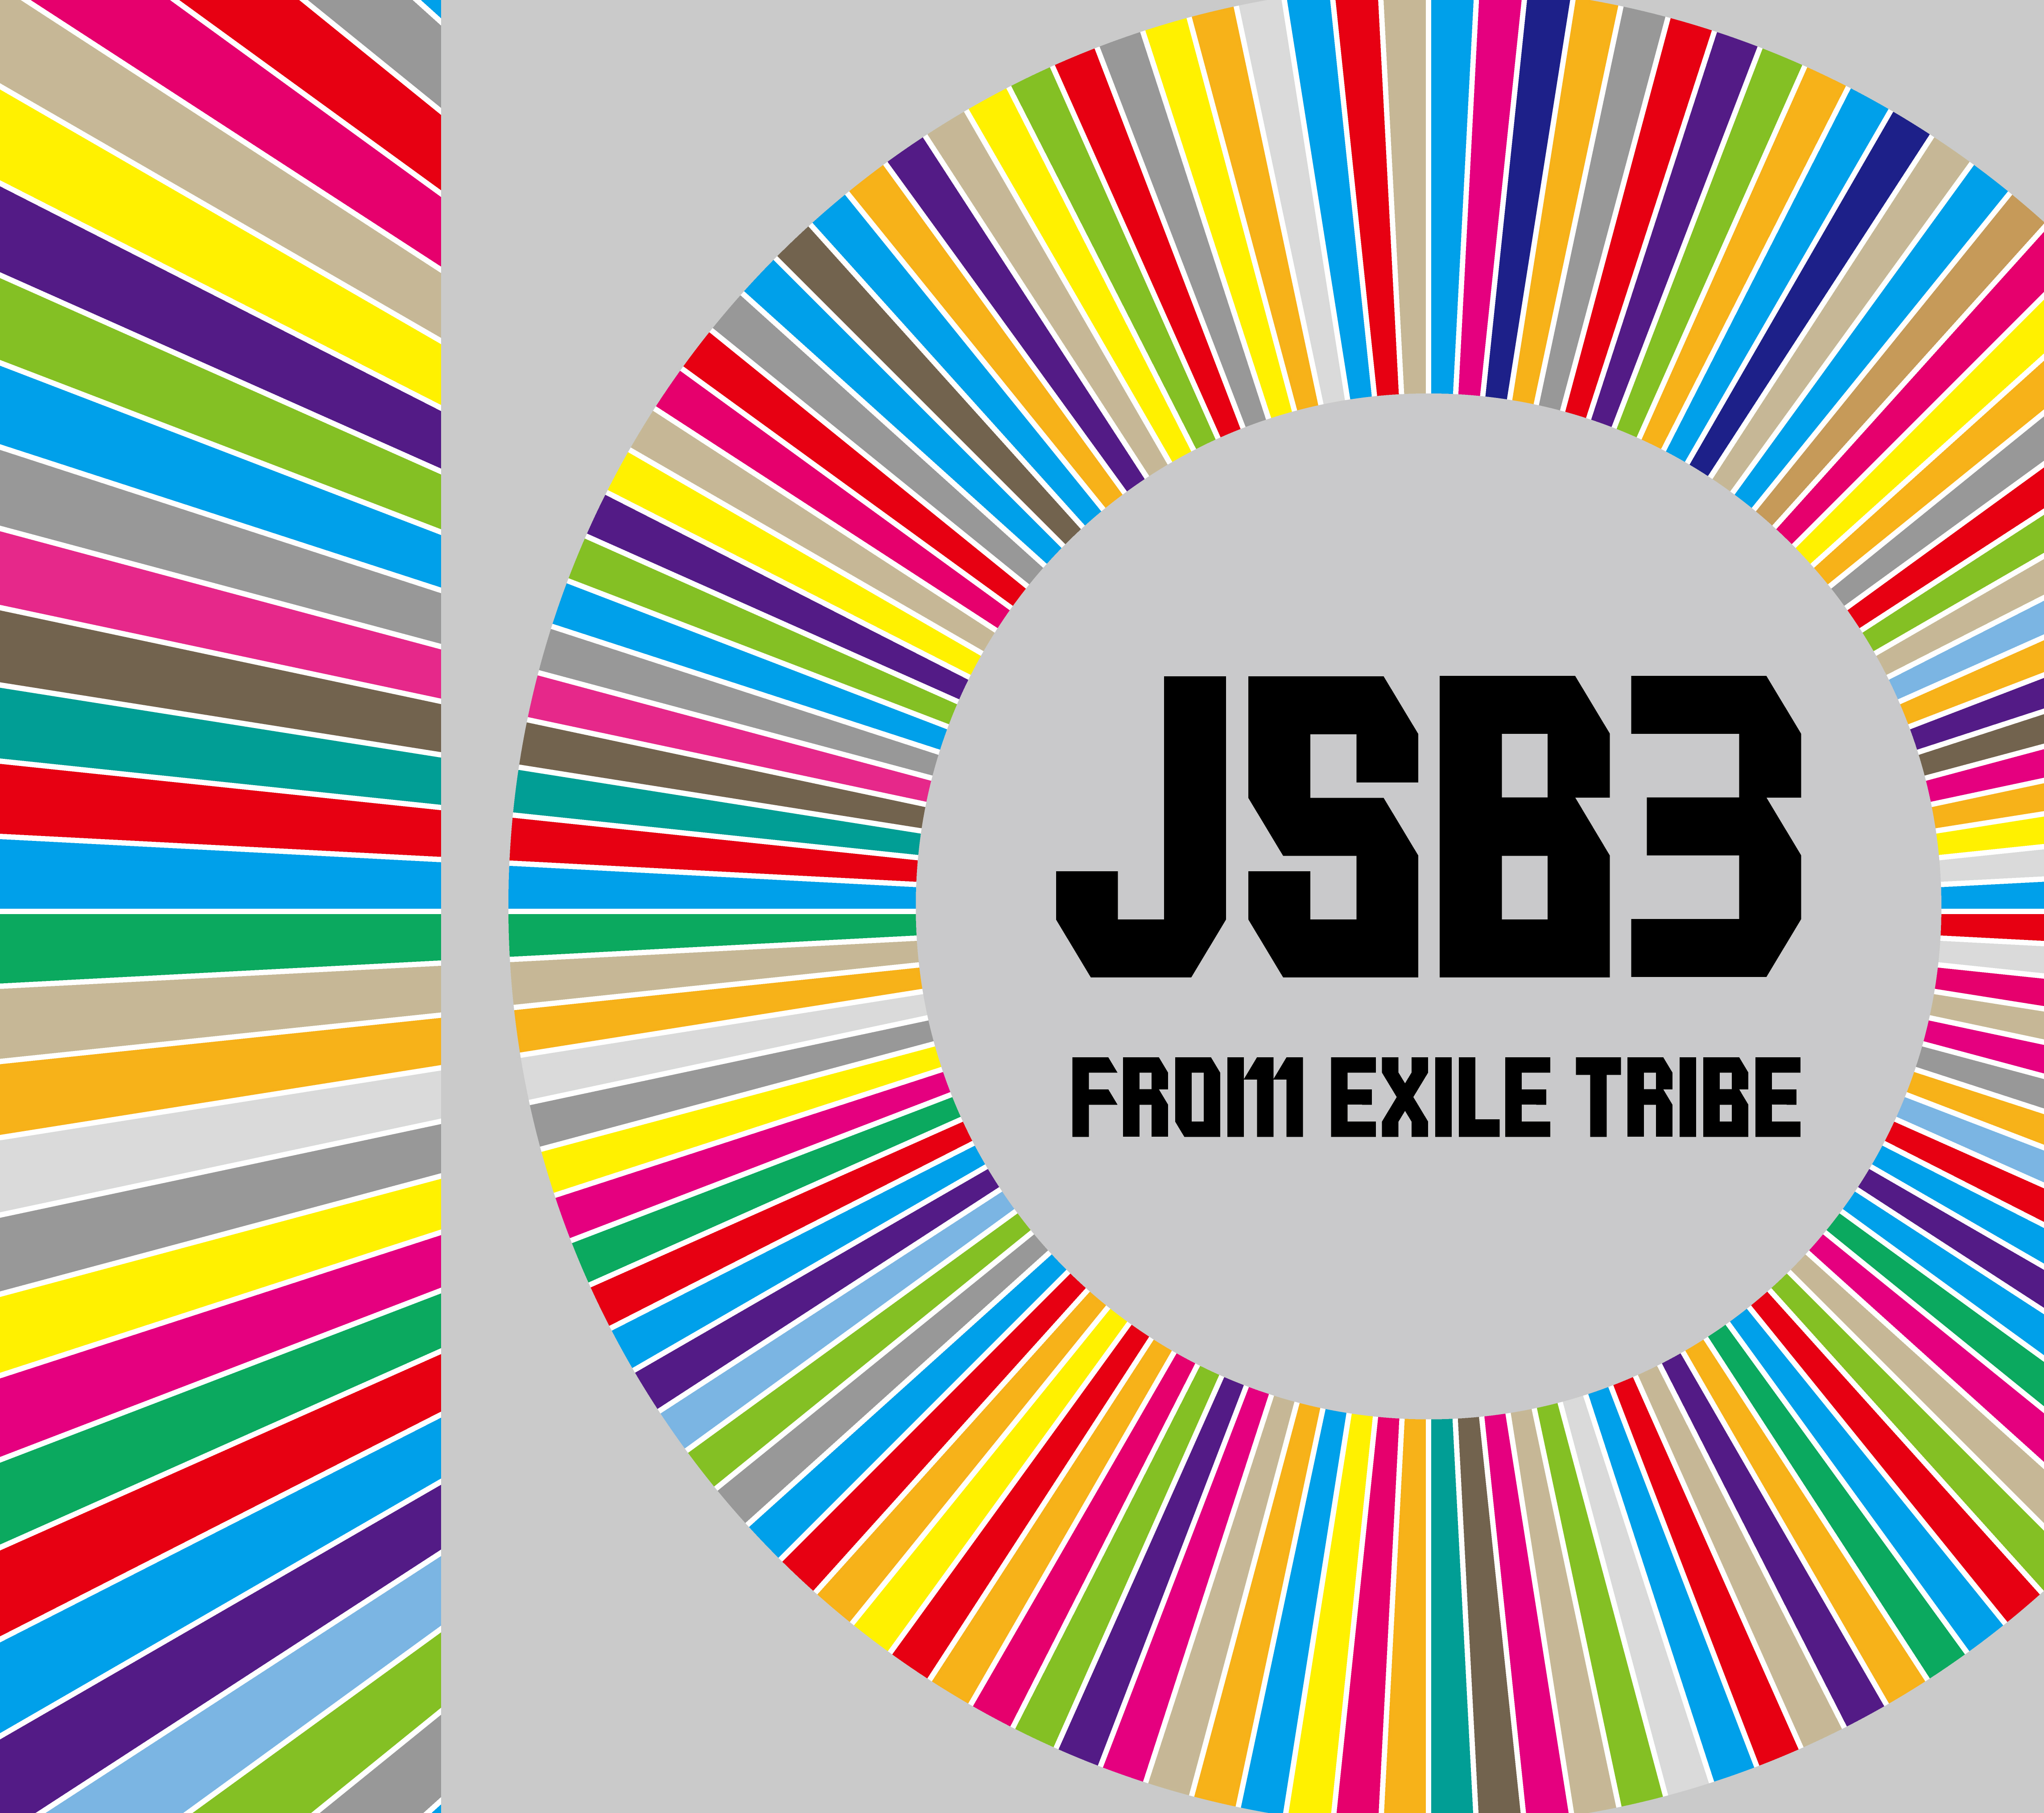 3JSB「BEST BROTHERS/THIS IS JSB」登坂広臣ver.-